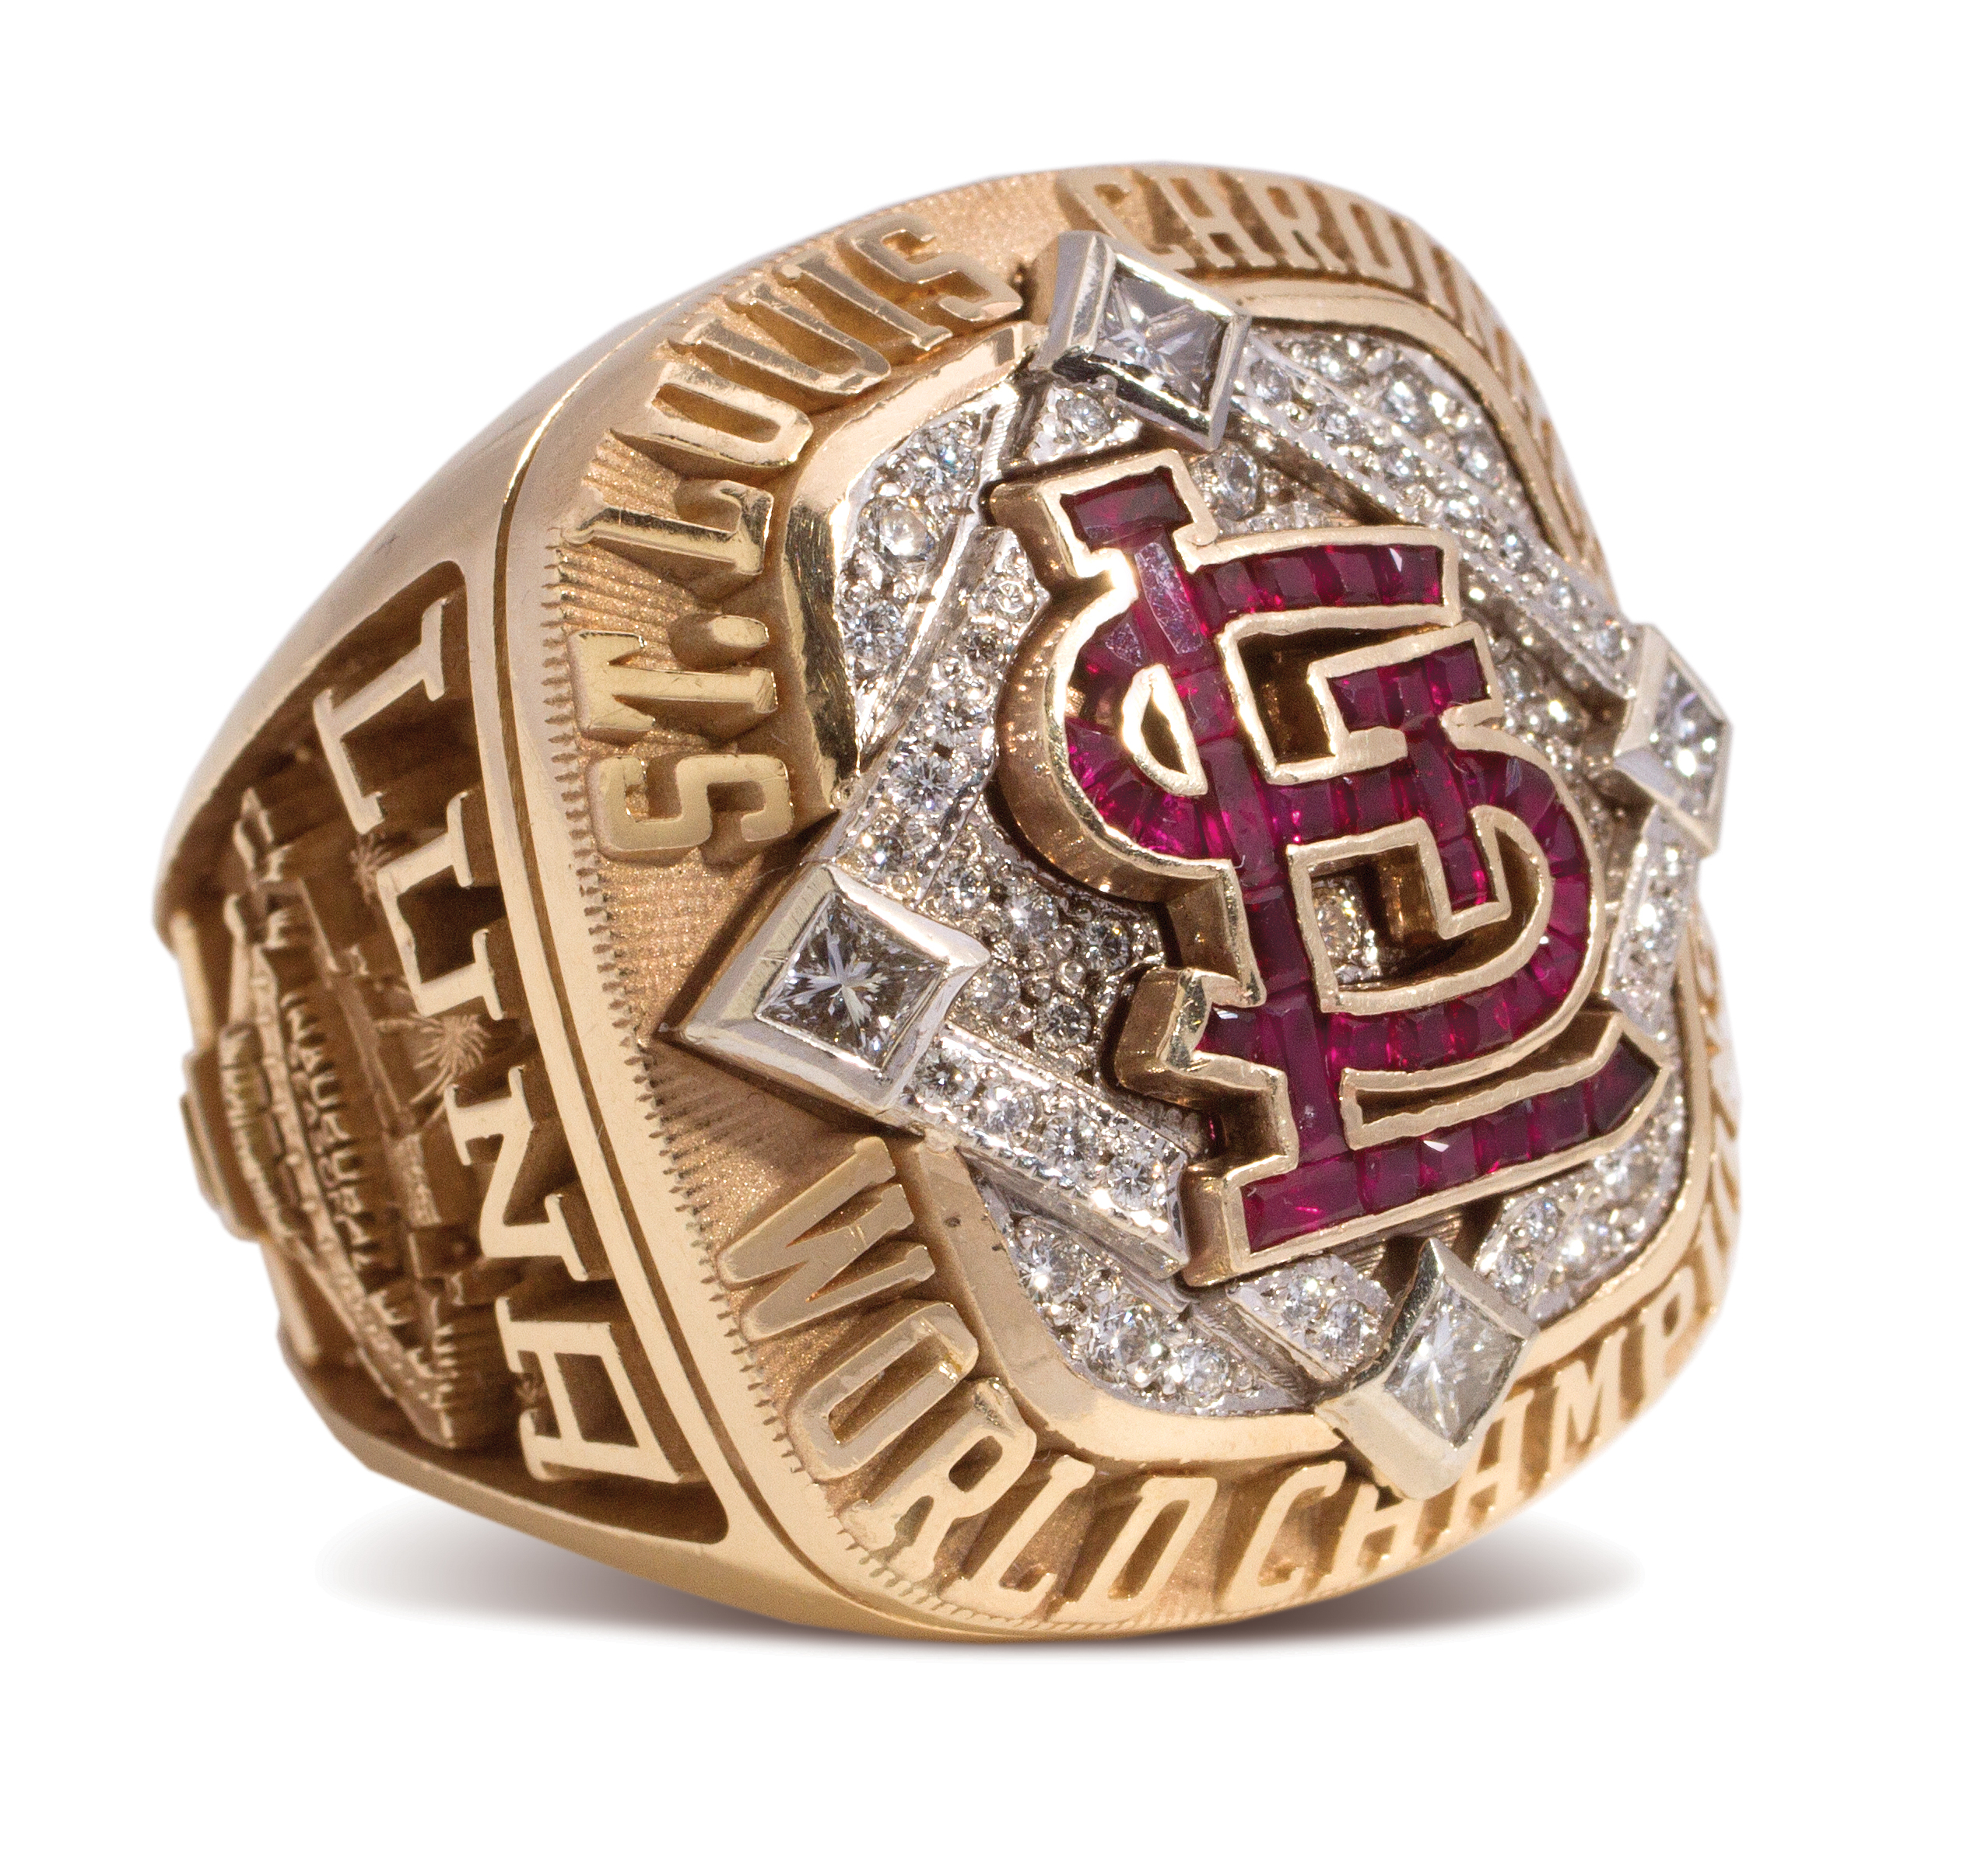 Cardinals World Series ring a contender for best bling